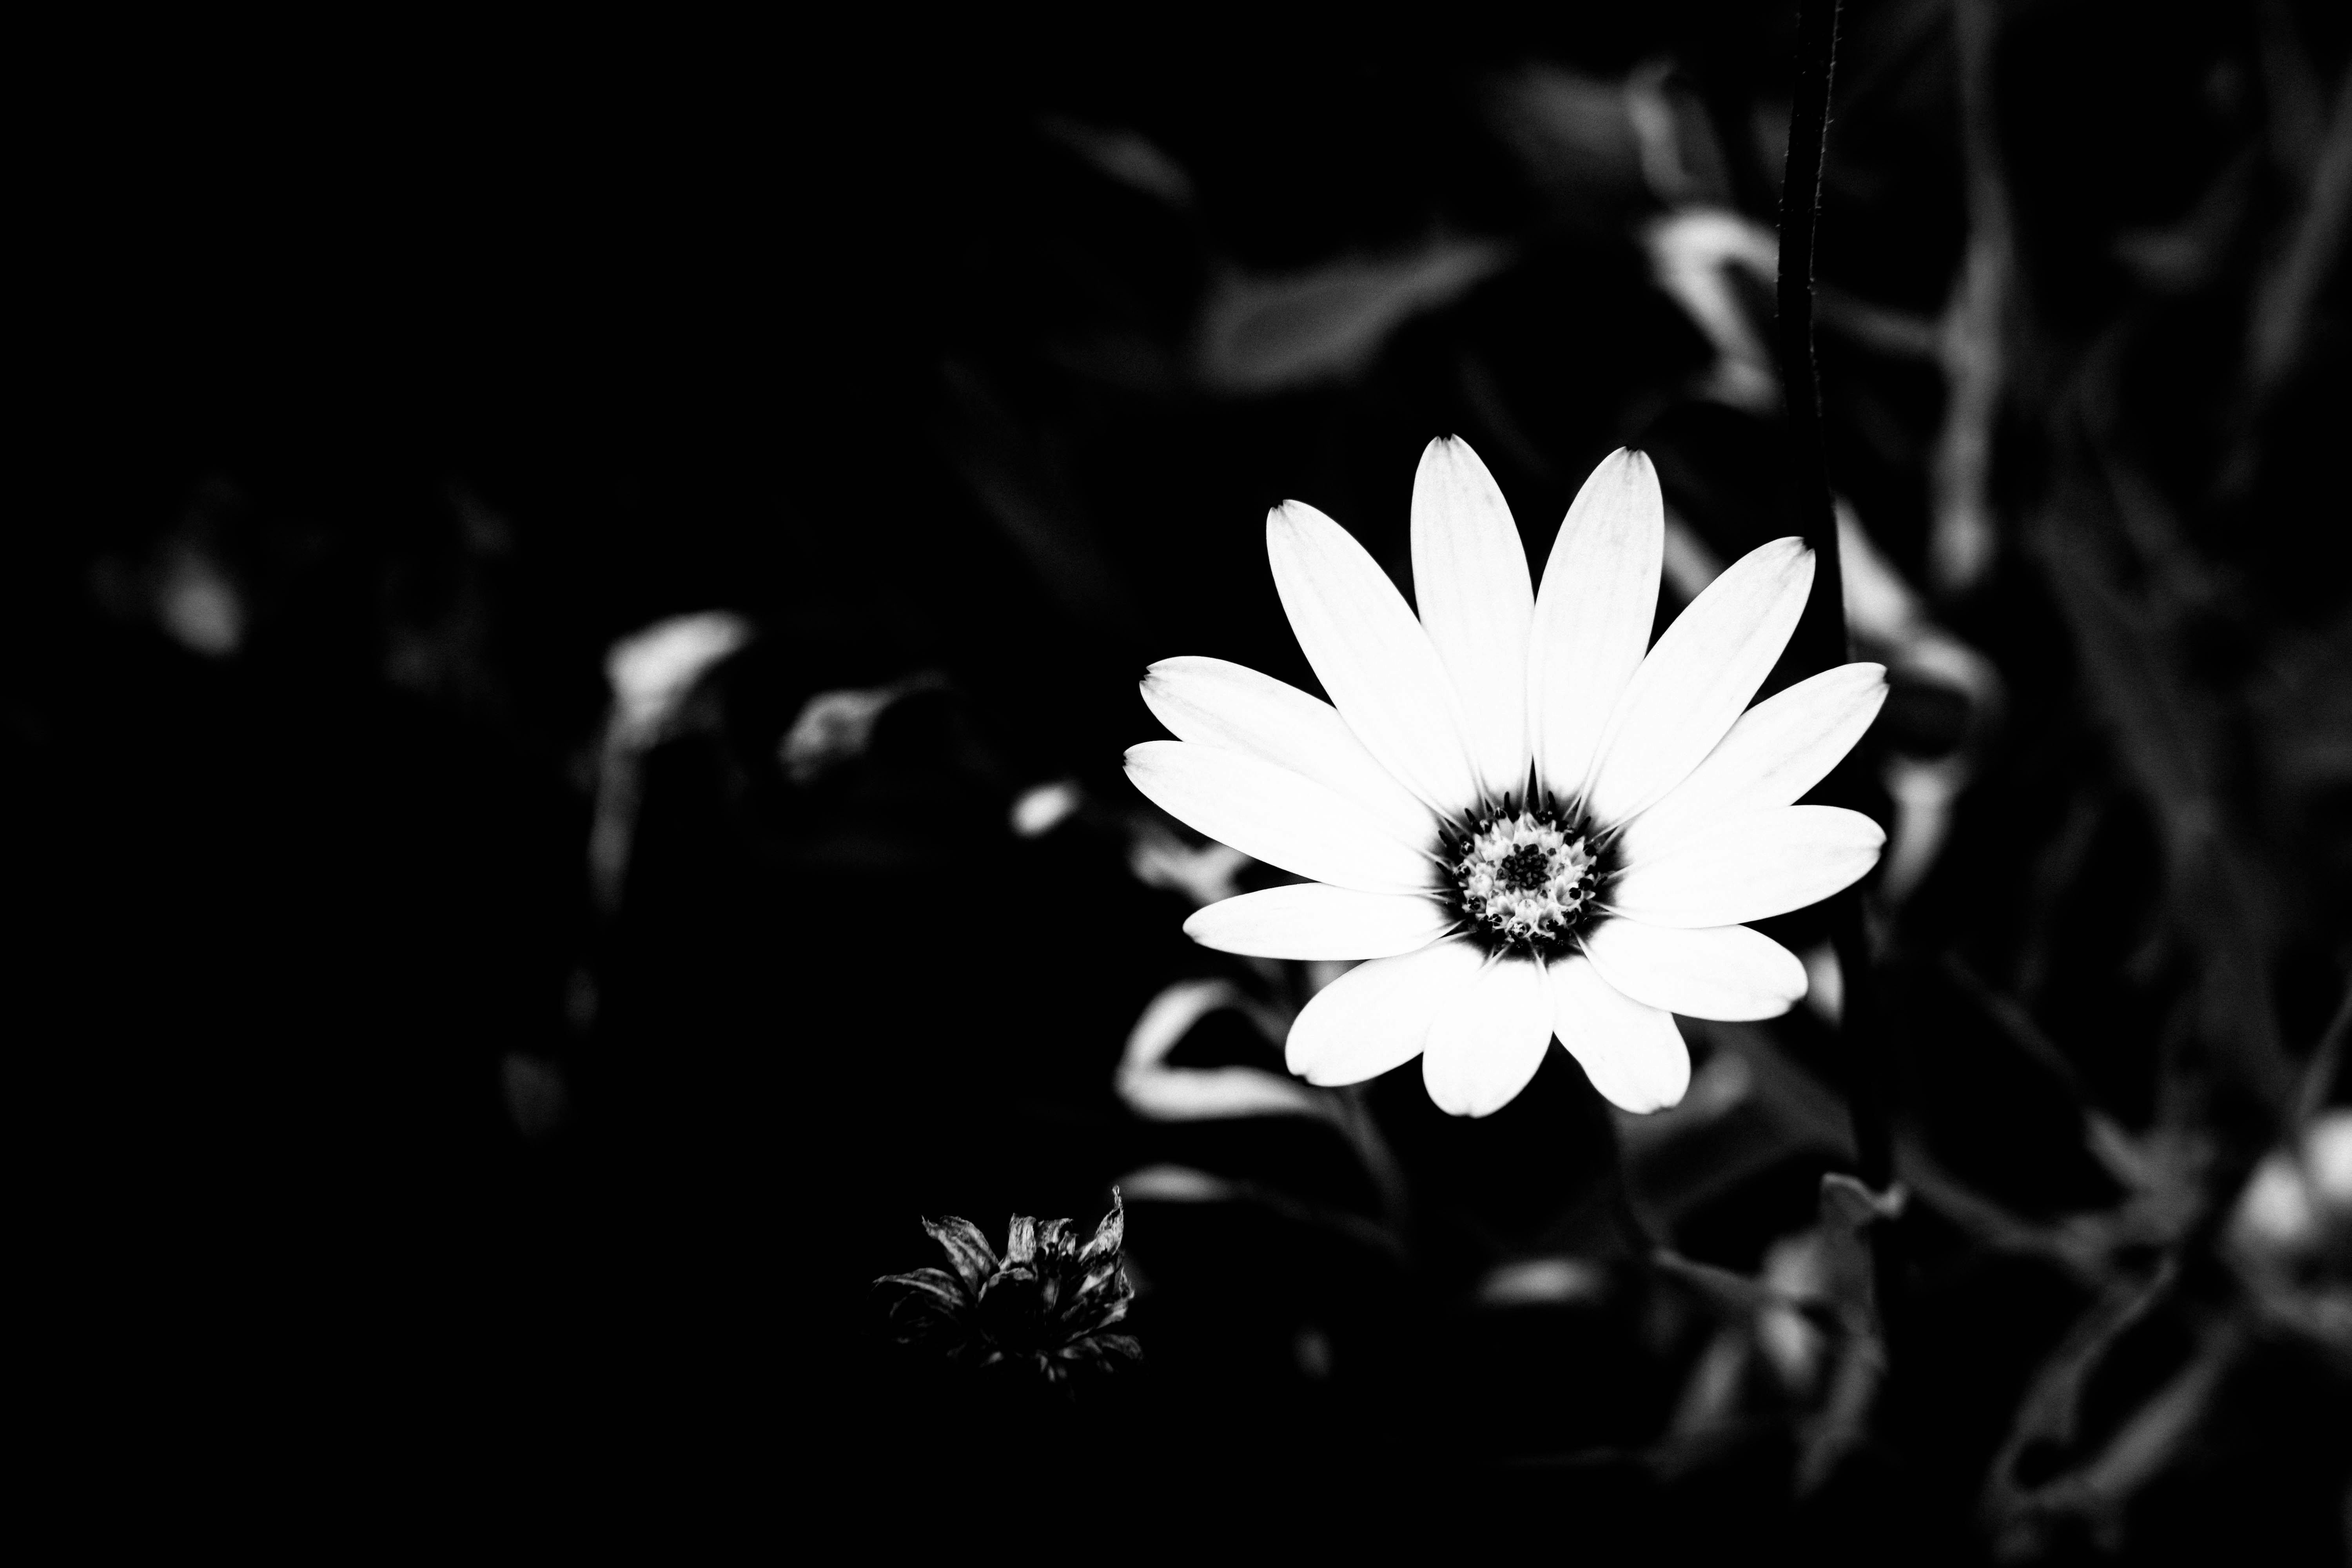 grayscale photo of daisy flower